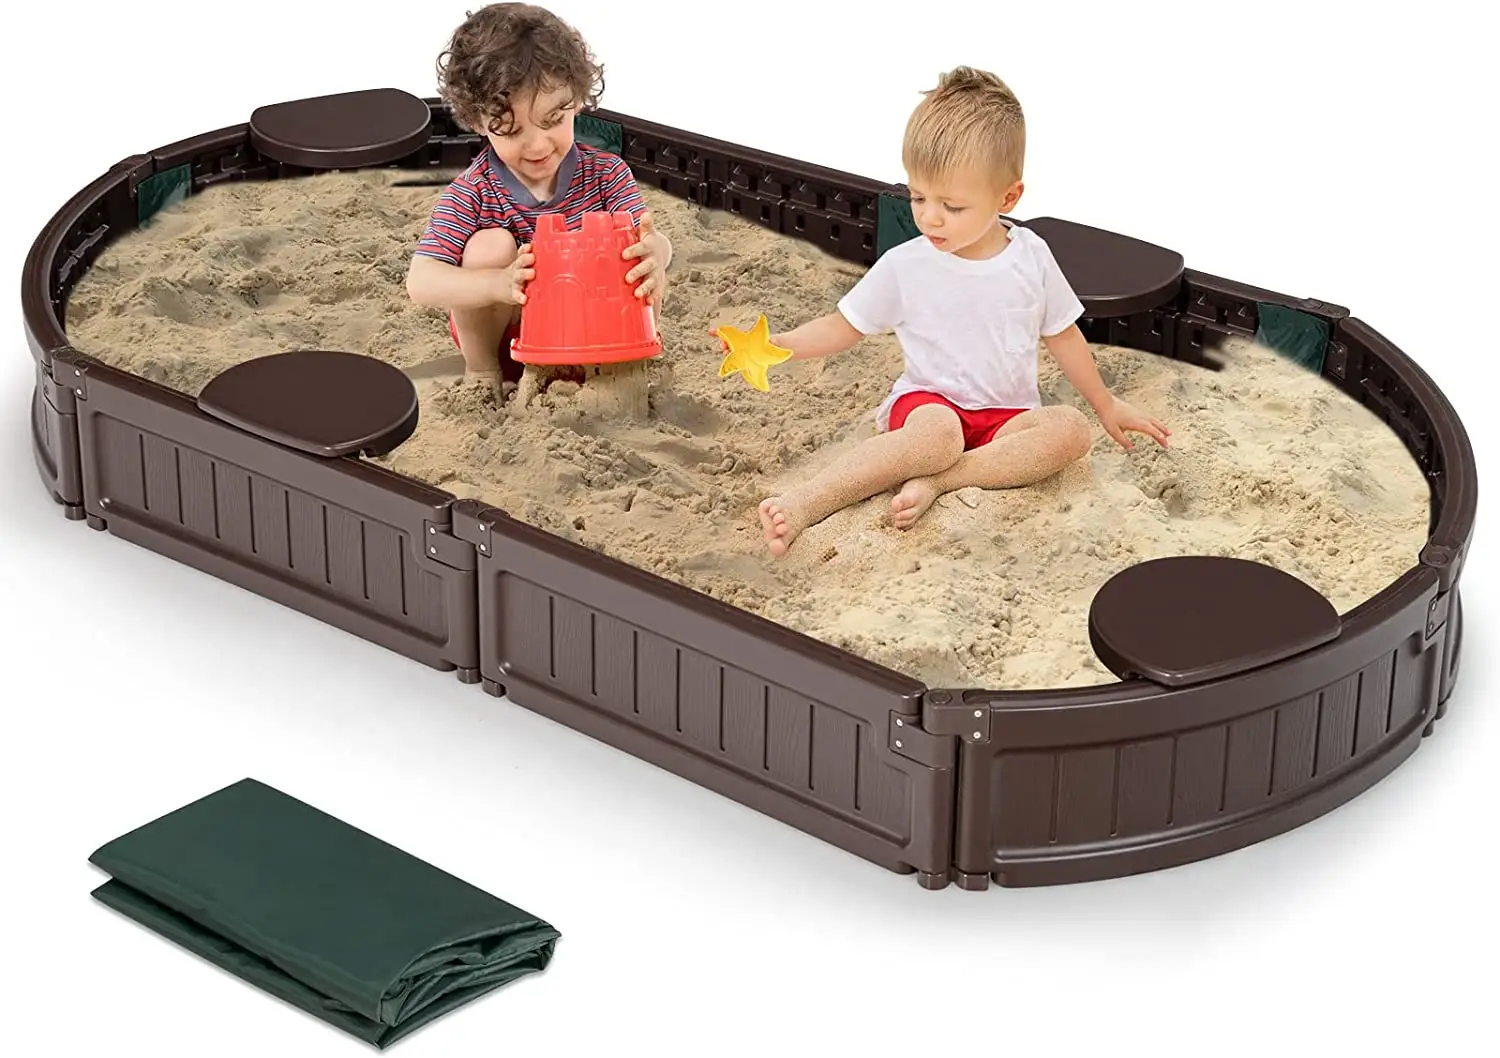 Popular Hot Selling 6ft Oval Plastic Sandbox for Kids with base and cover